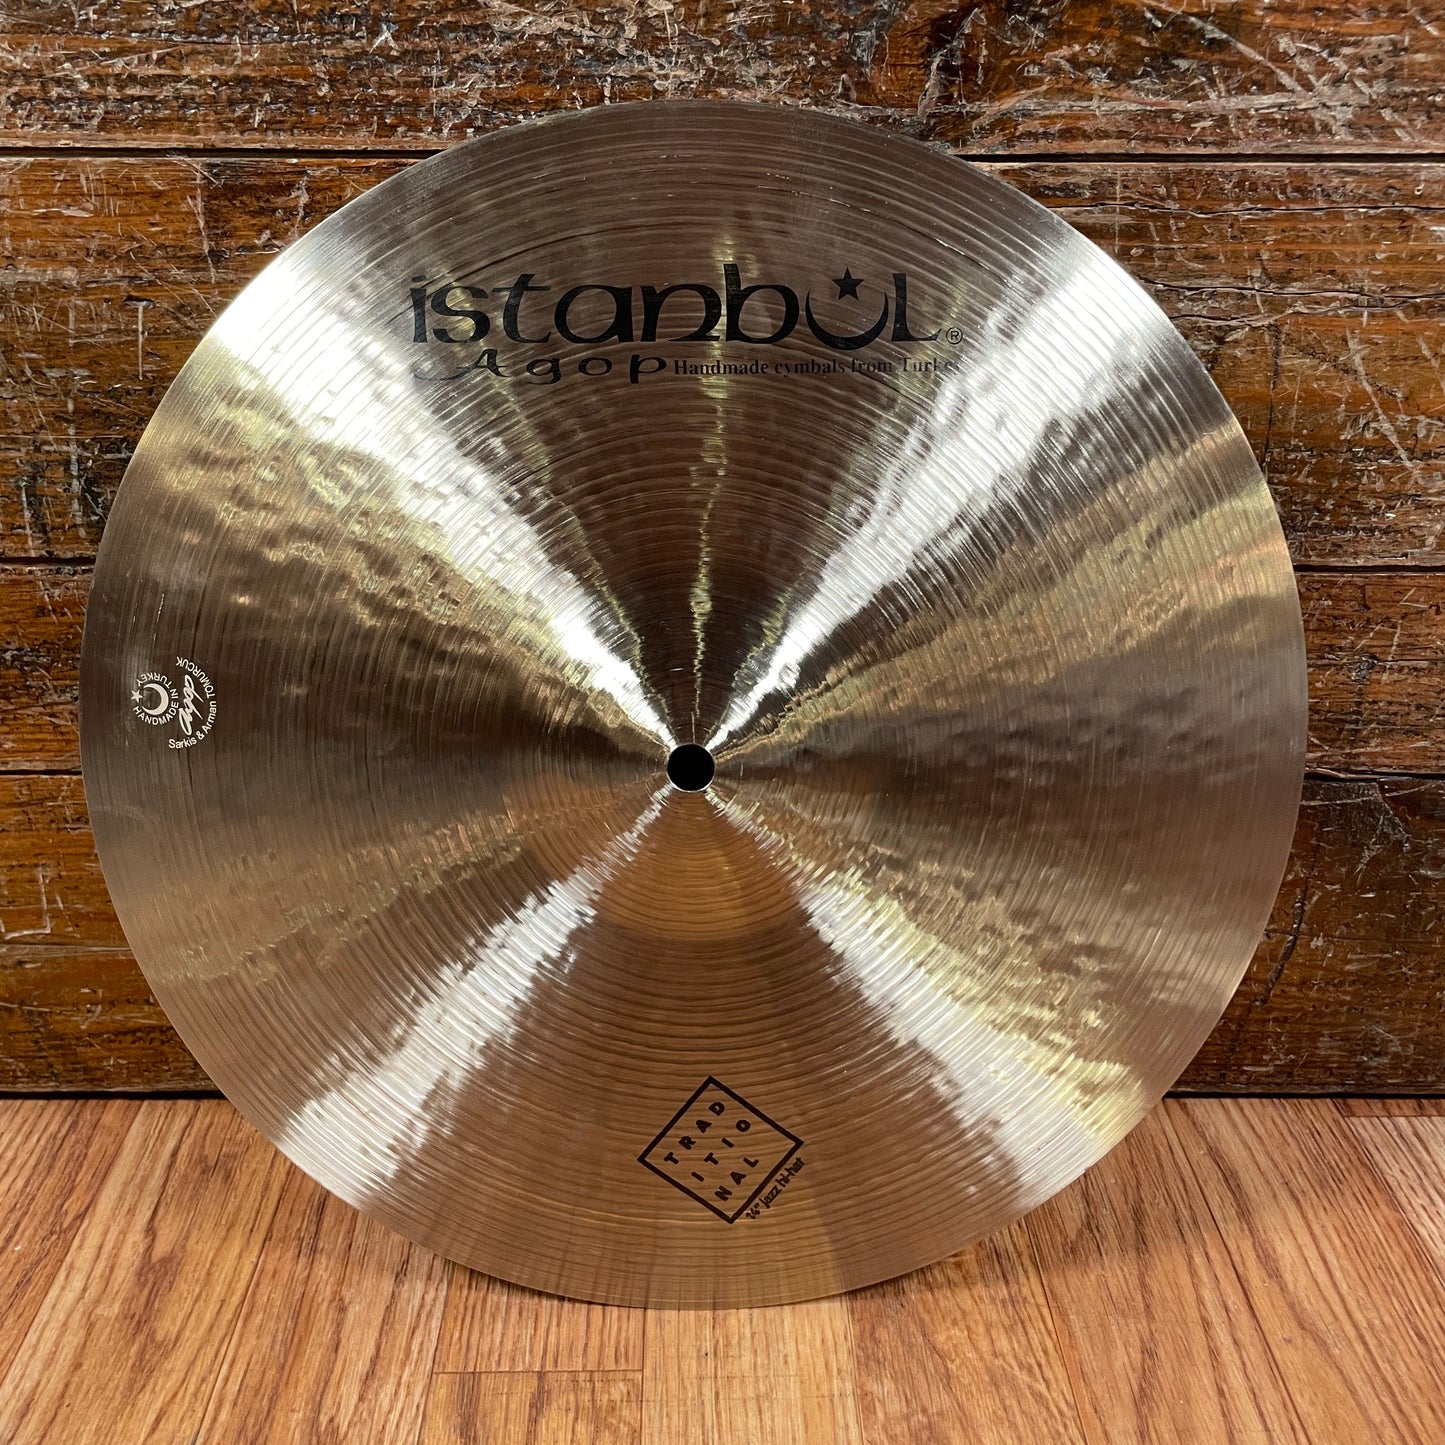 14" Istanbul Agop Traditional Jazz Hi-Hat Cymbal Pair 888g/1092g *Video Demo*